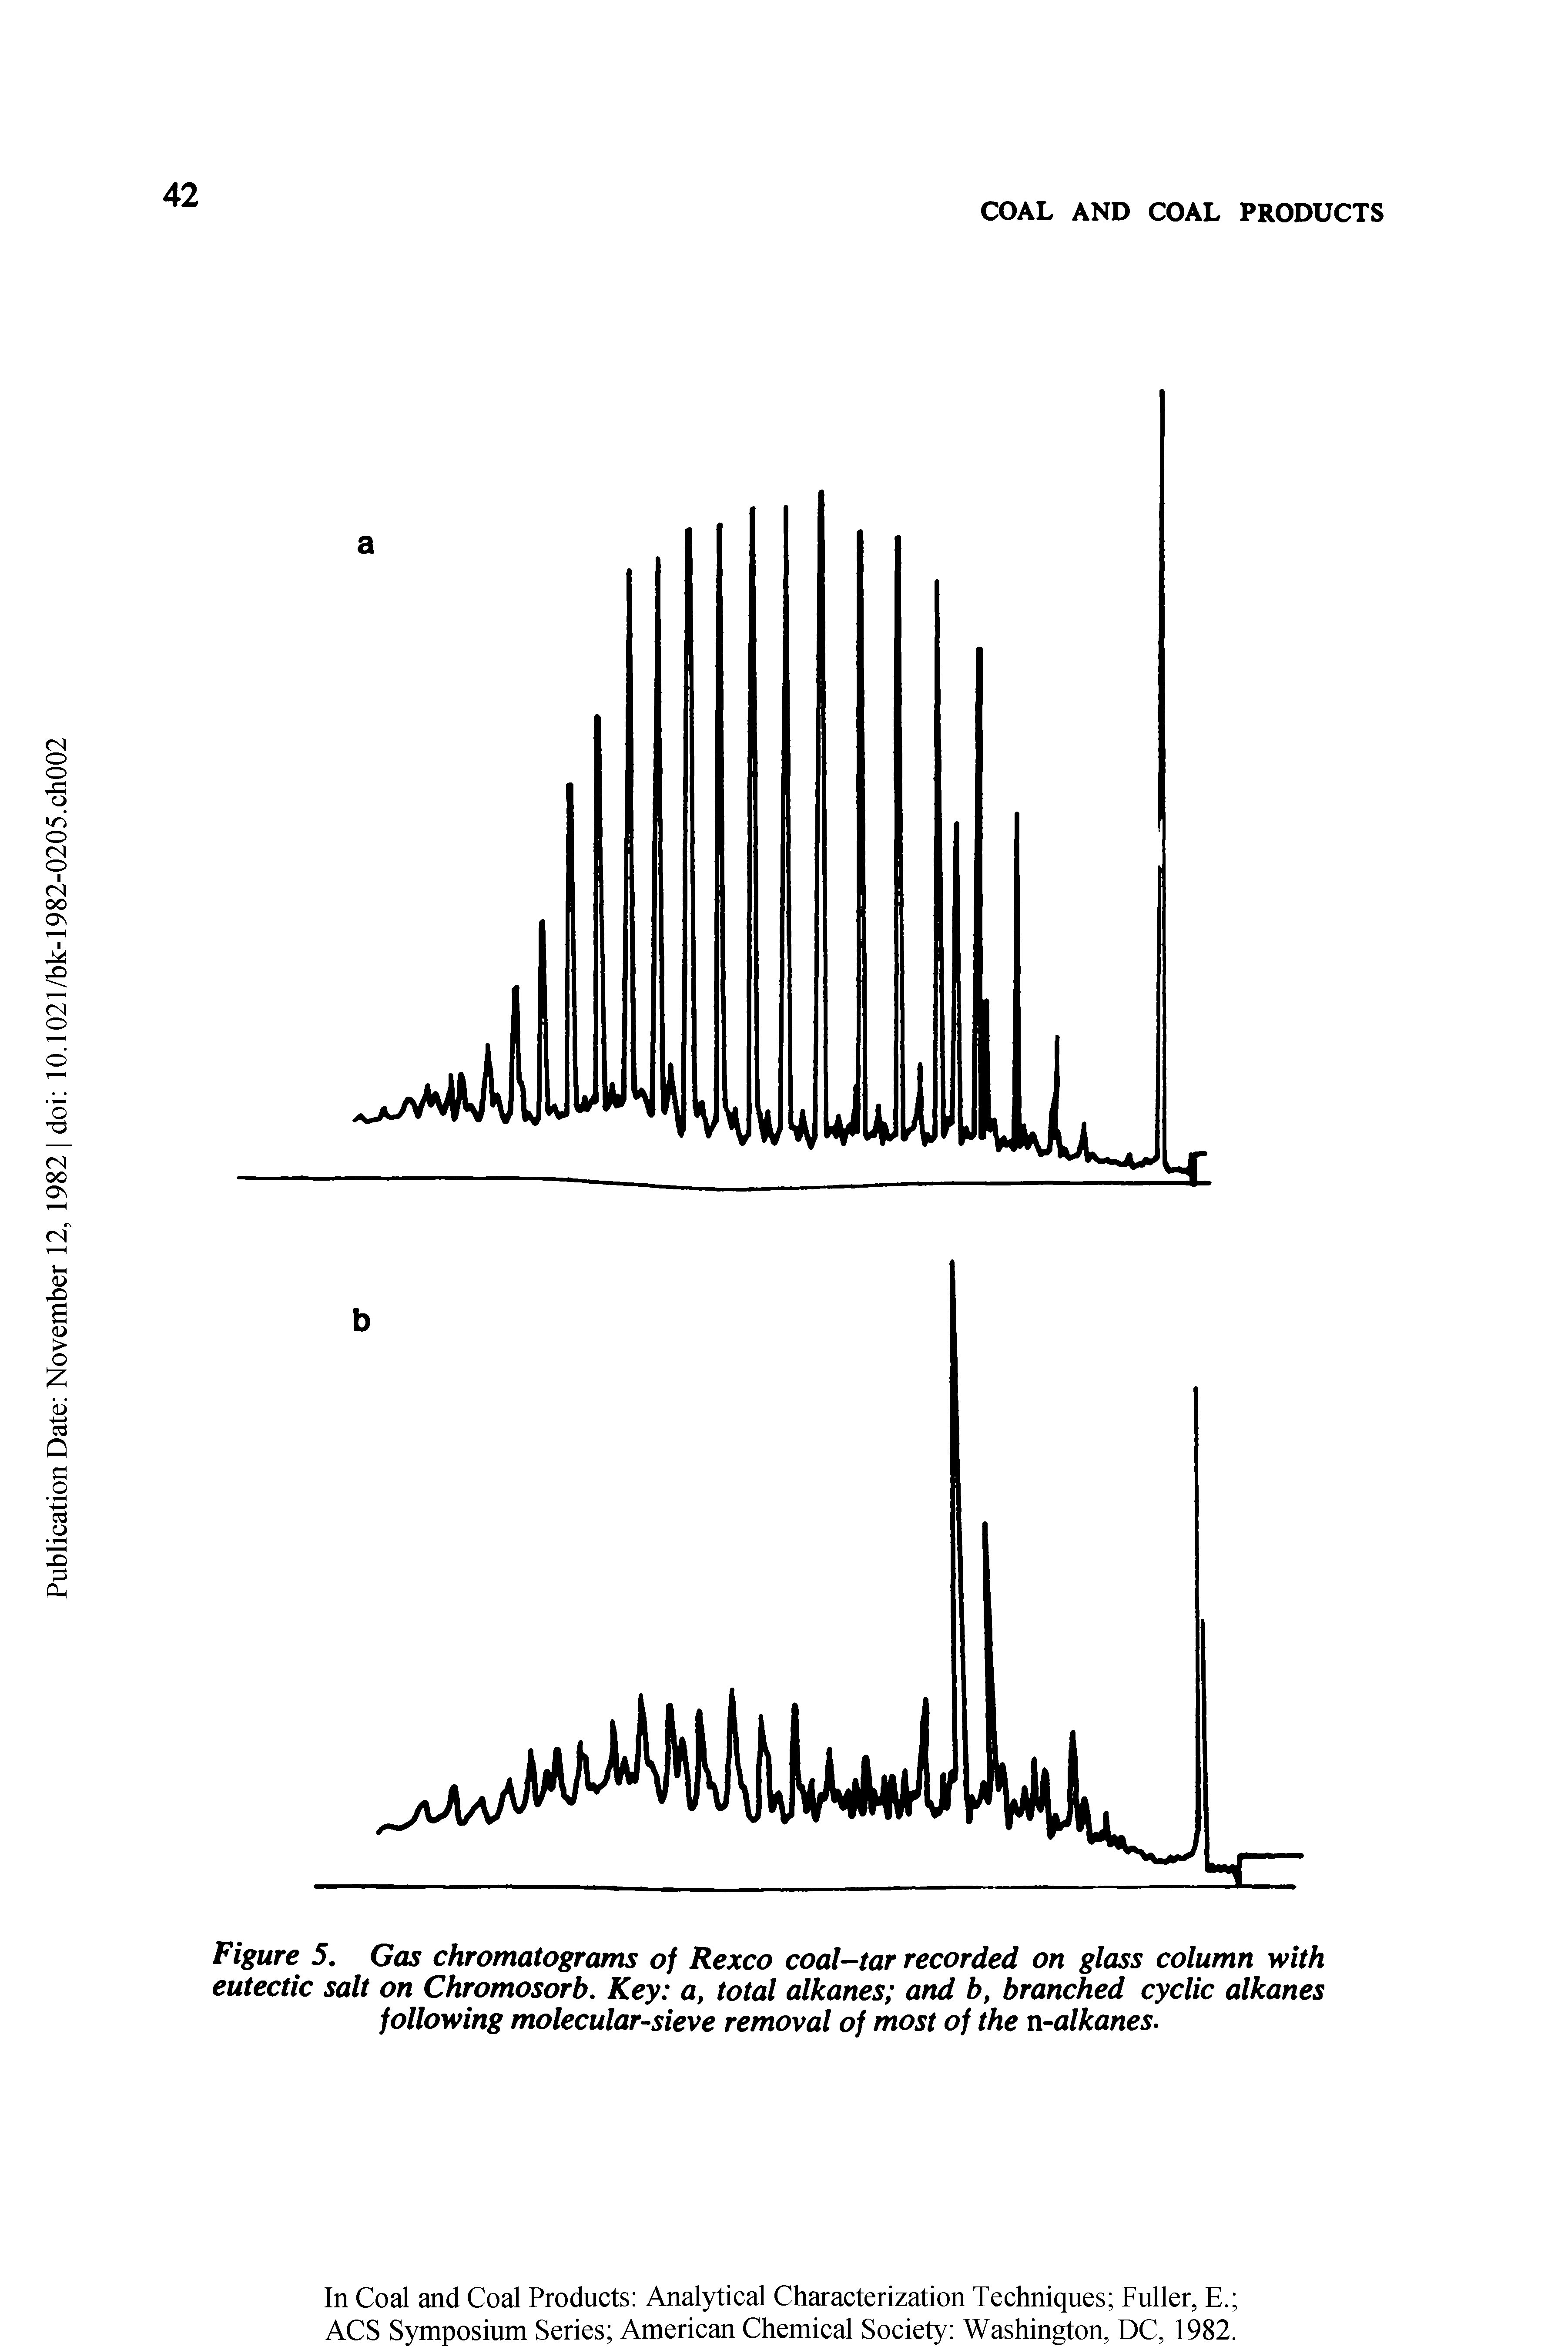 Figure 5, Gas chromatograms of Rexco coal-tar recorded on glass column with eutectic salt on Chromosorb. Key a, total alkanes and b, branched cyclic alkanes following molecular-sieve removal of most of the n-alkanes.